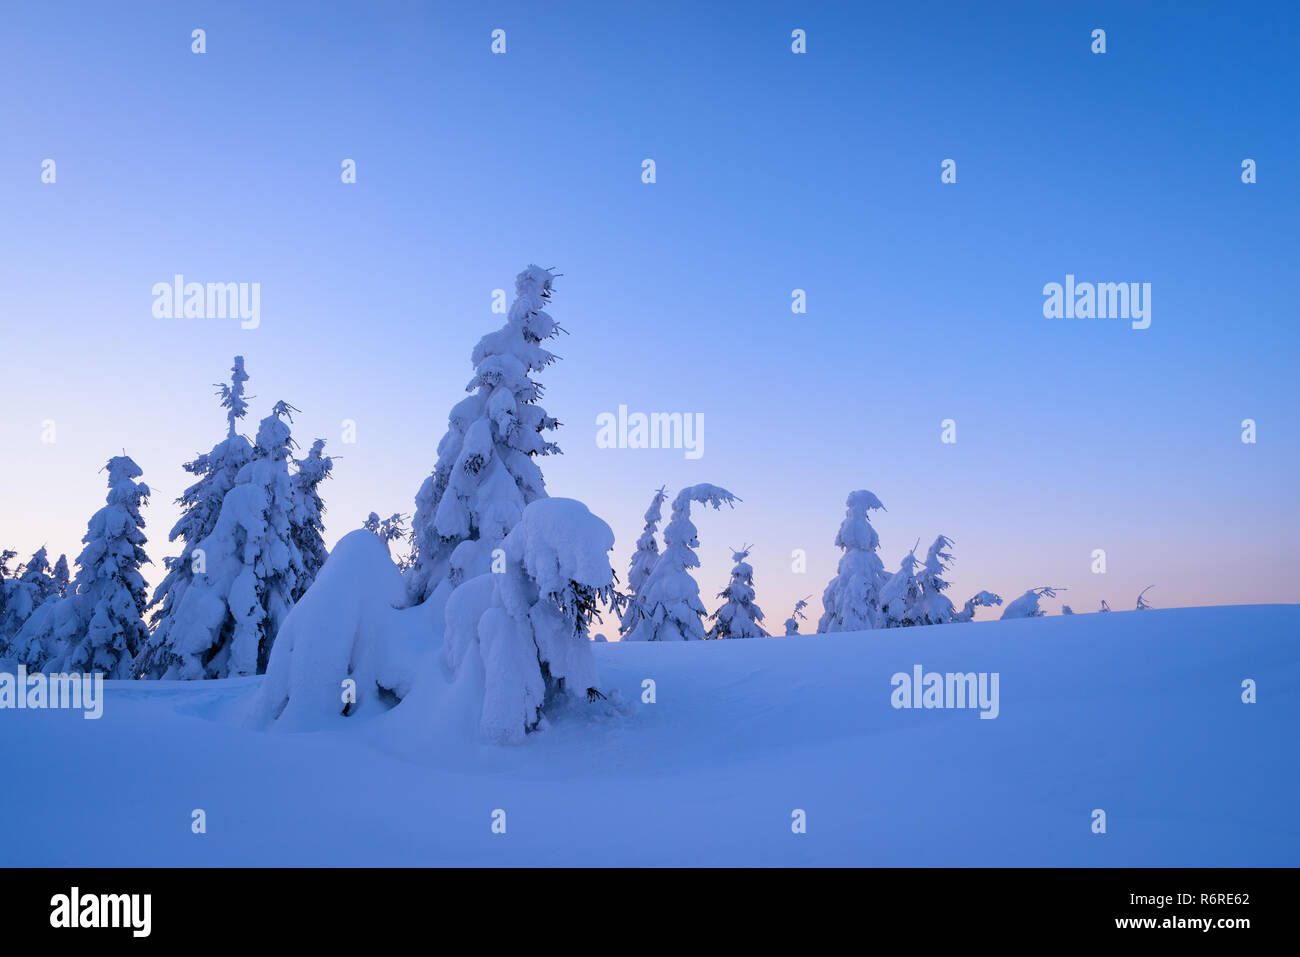 Winter wonderland with snow-covered fir trees and large snowdrifts. Dusky Landscape in Blue Stock Photo